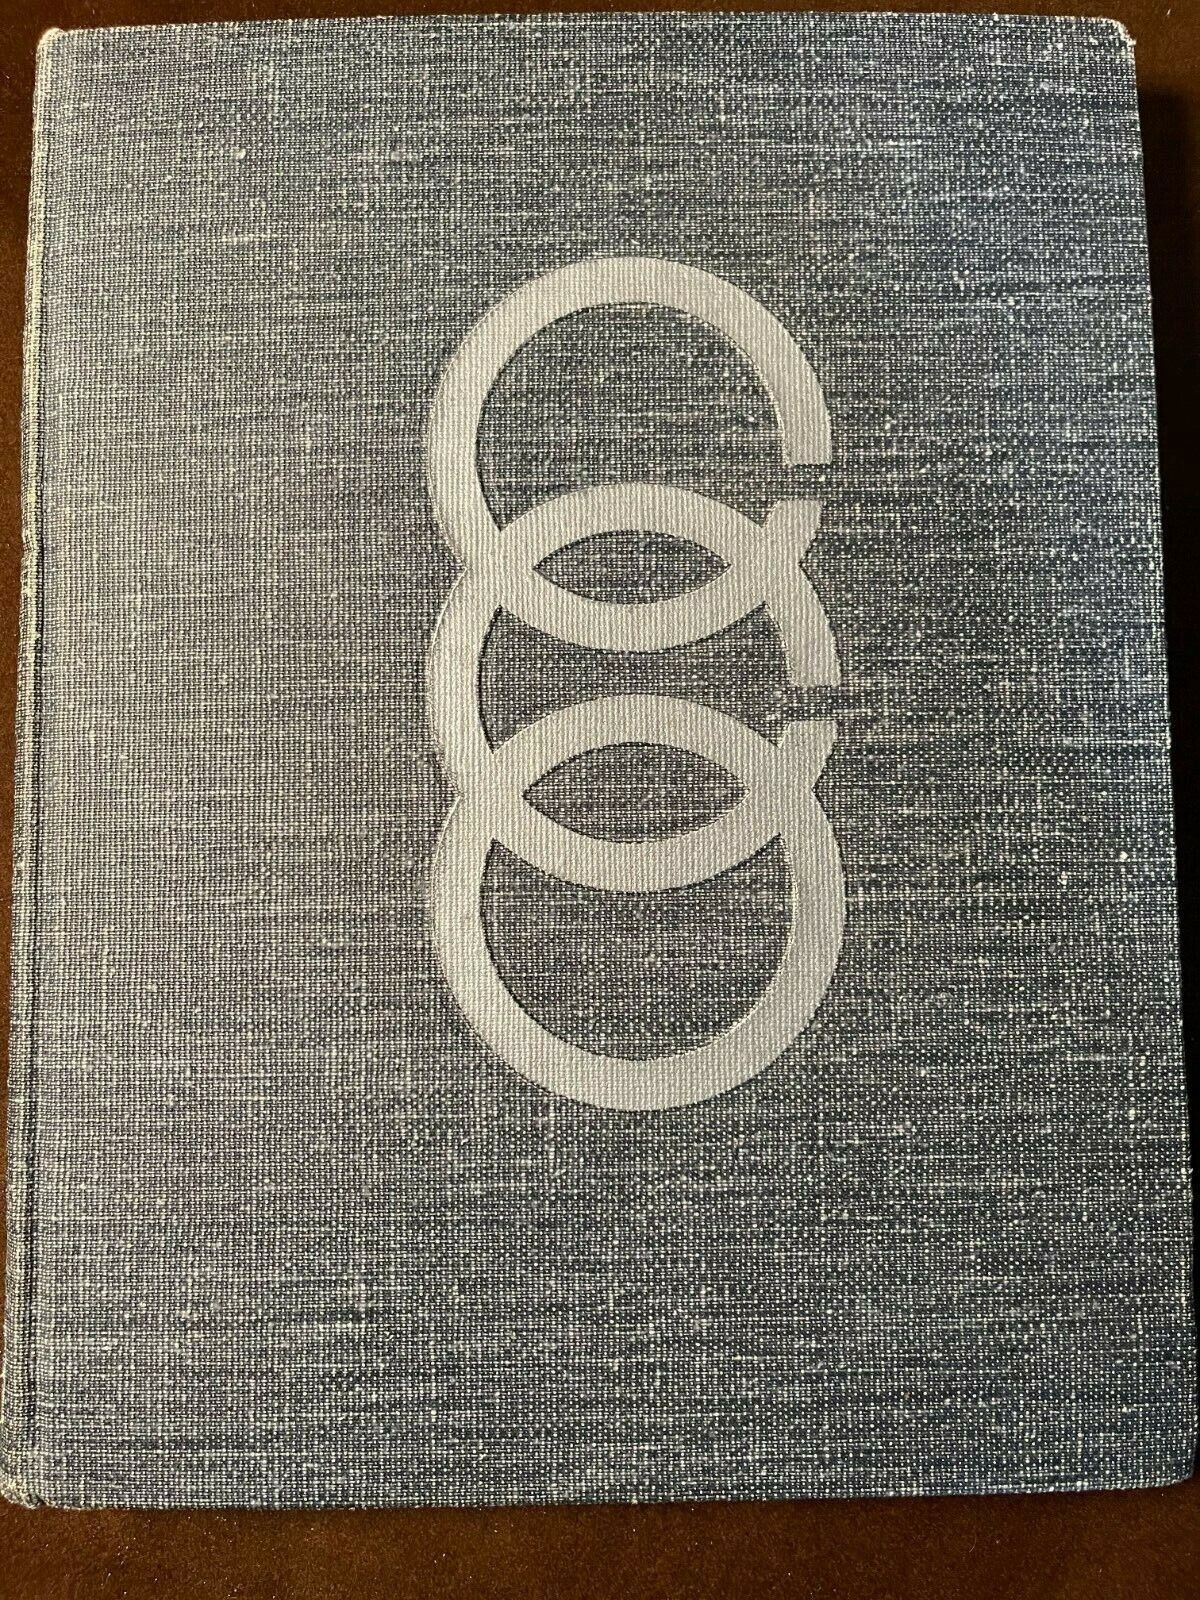 1967 Chicago College of Osteopathy The Osteon Yearbook Downers Grove, IL 60515